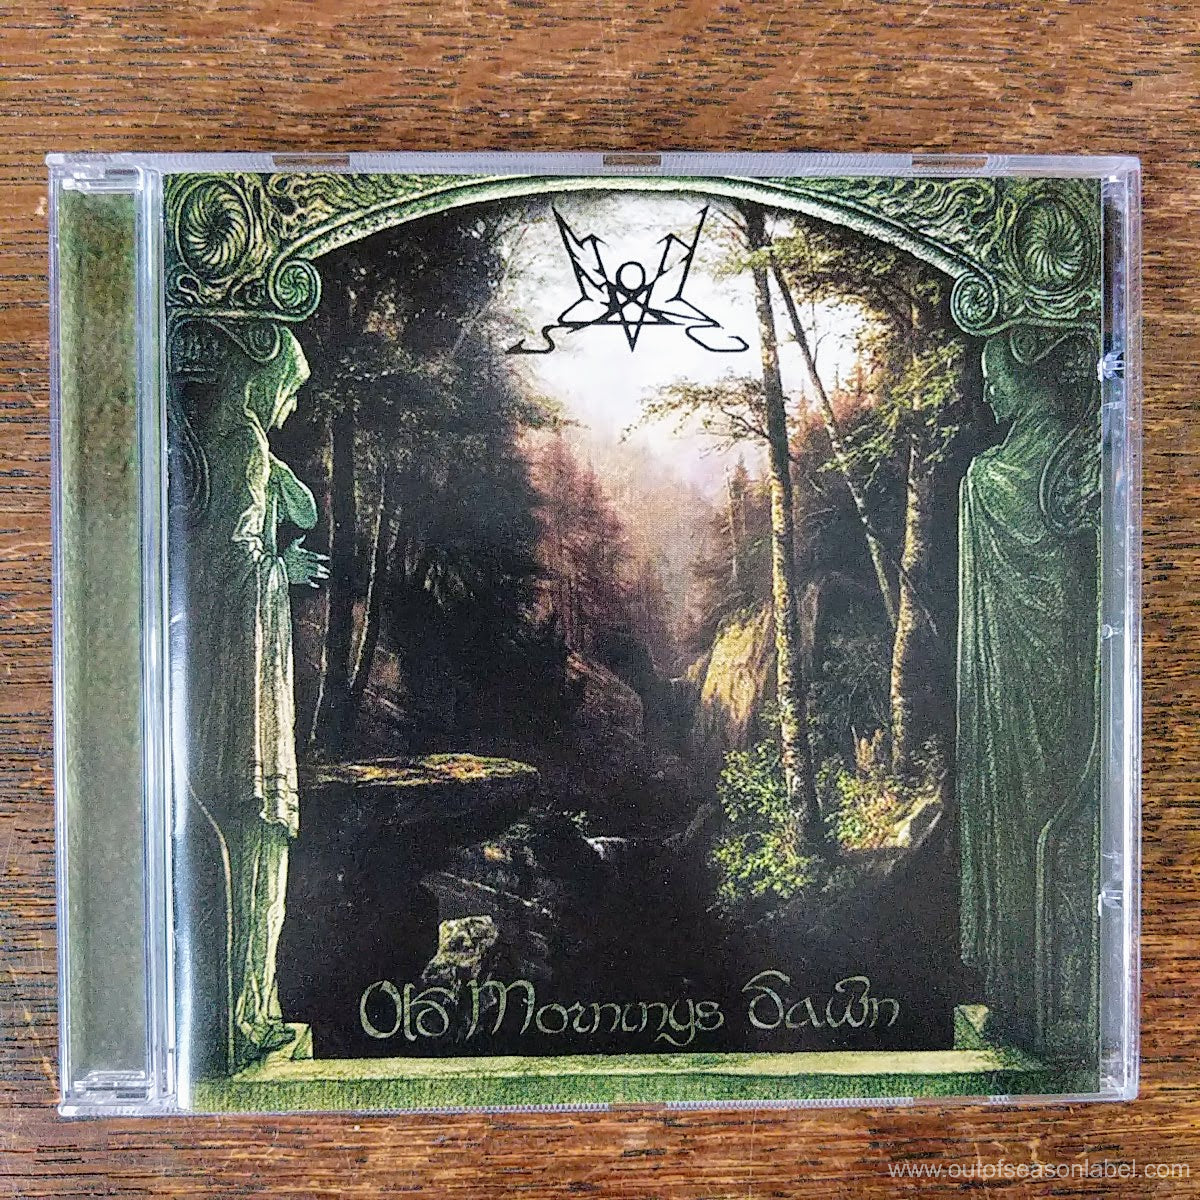 [SOLD OUT] SUMMONING "Old Mornings Dawn" CD